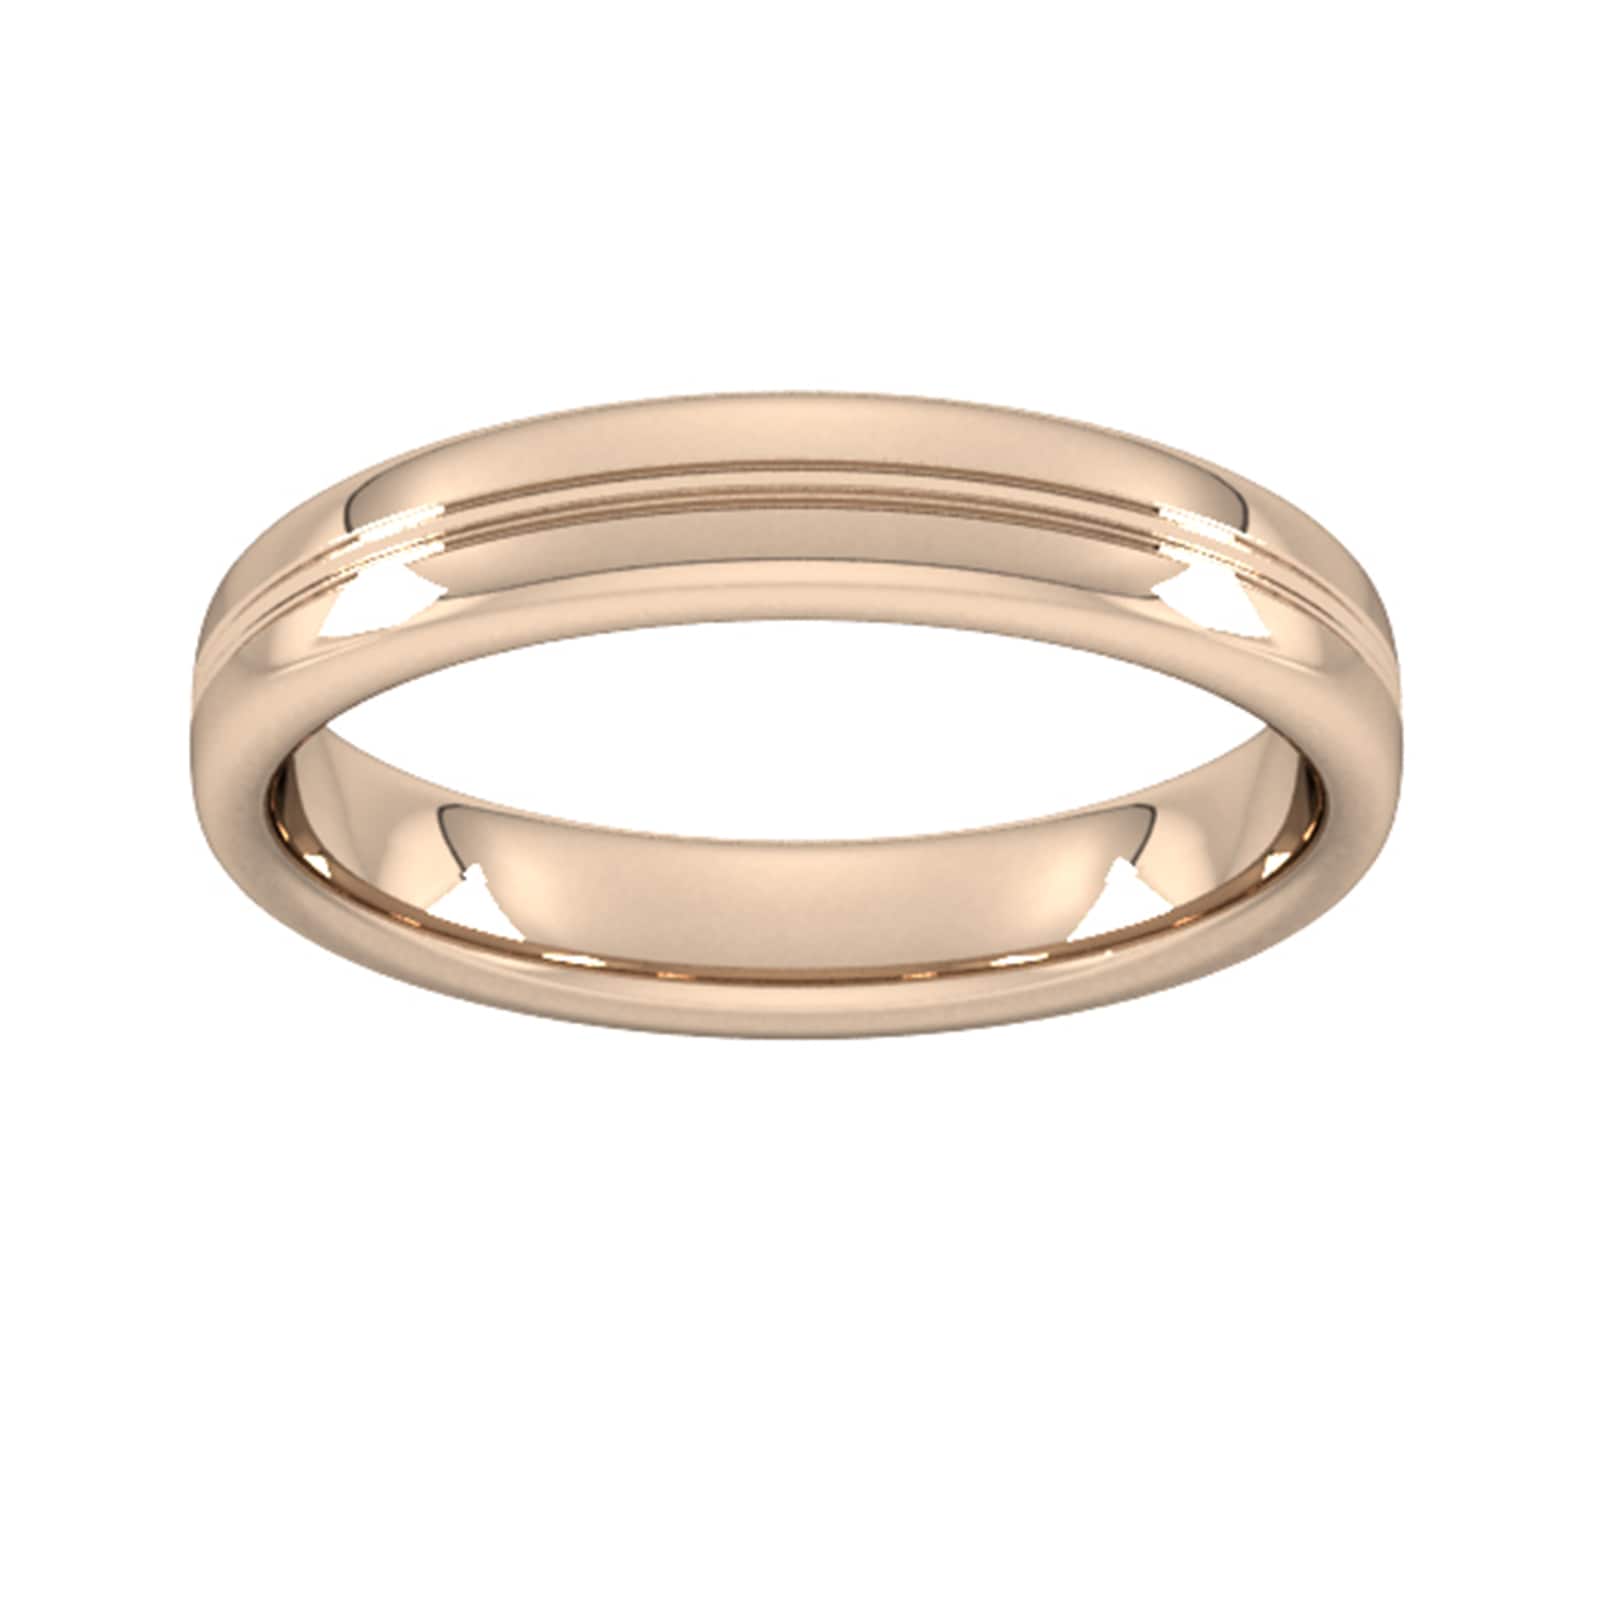 4mm Slight Court Extra Heavy Grooved Polished Finish Wedding Ring In 9 Carat Rose Gold - Ring Size H